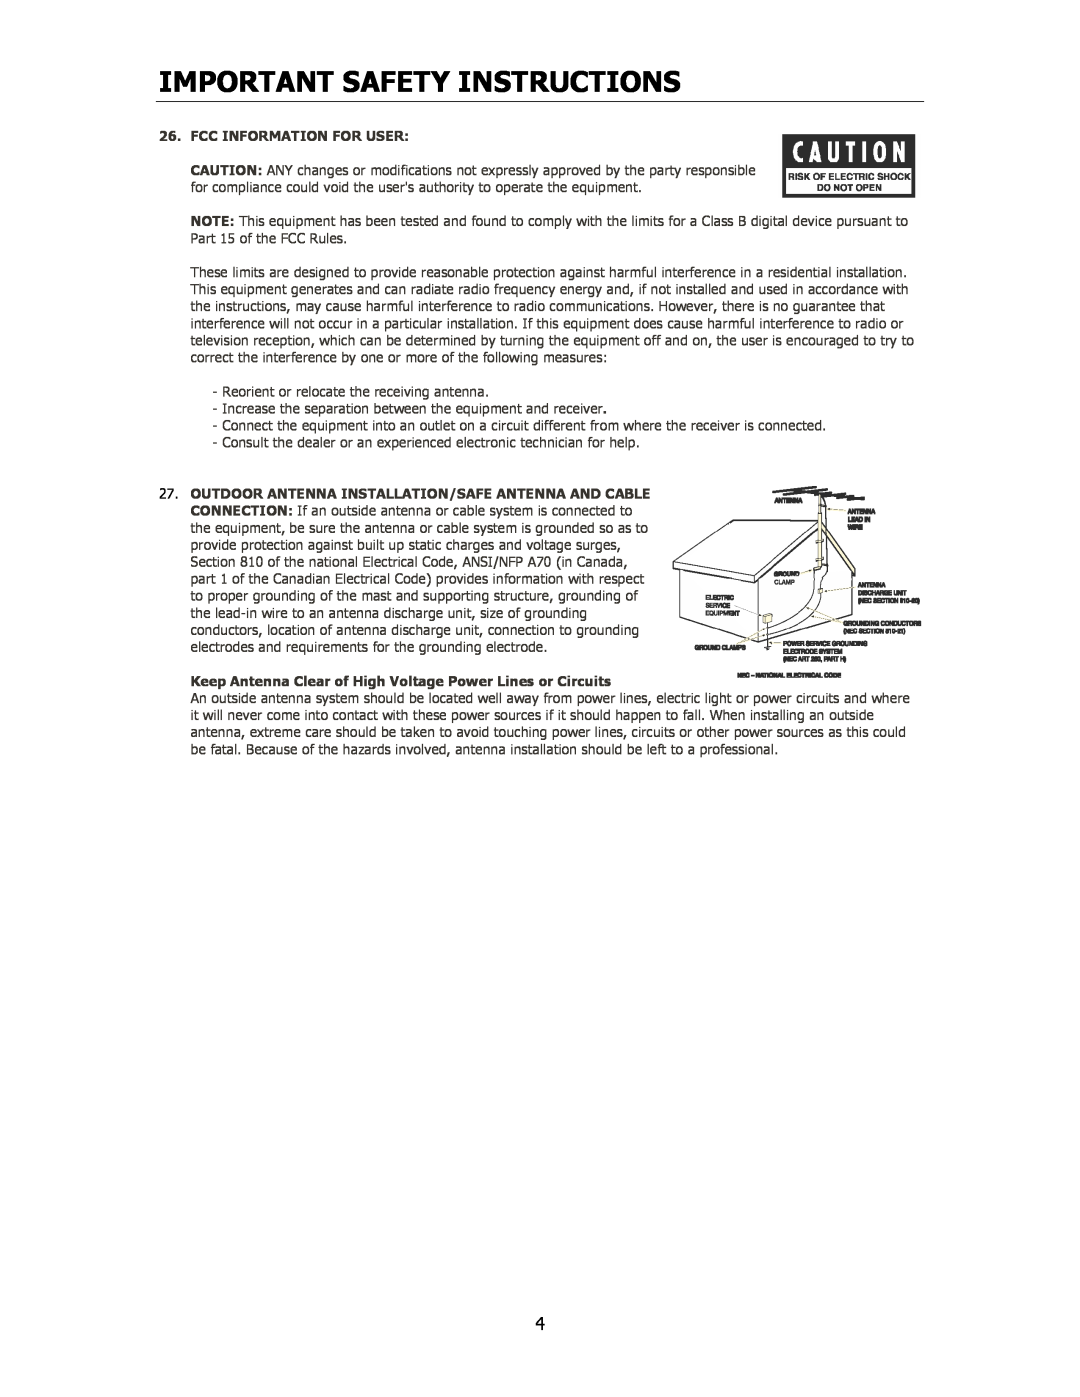 Cary Audio Design 7.25 owner manual Important Safety Instructions, Fcc Information For User 